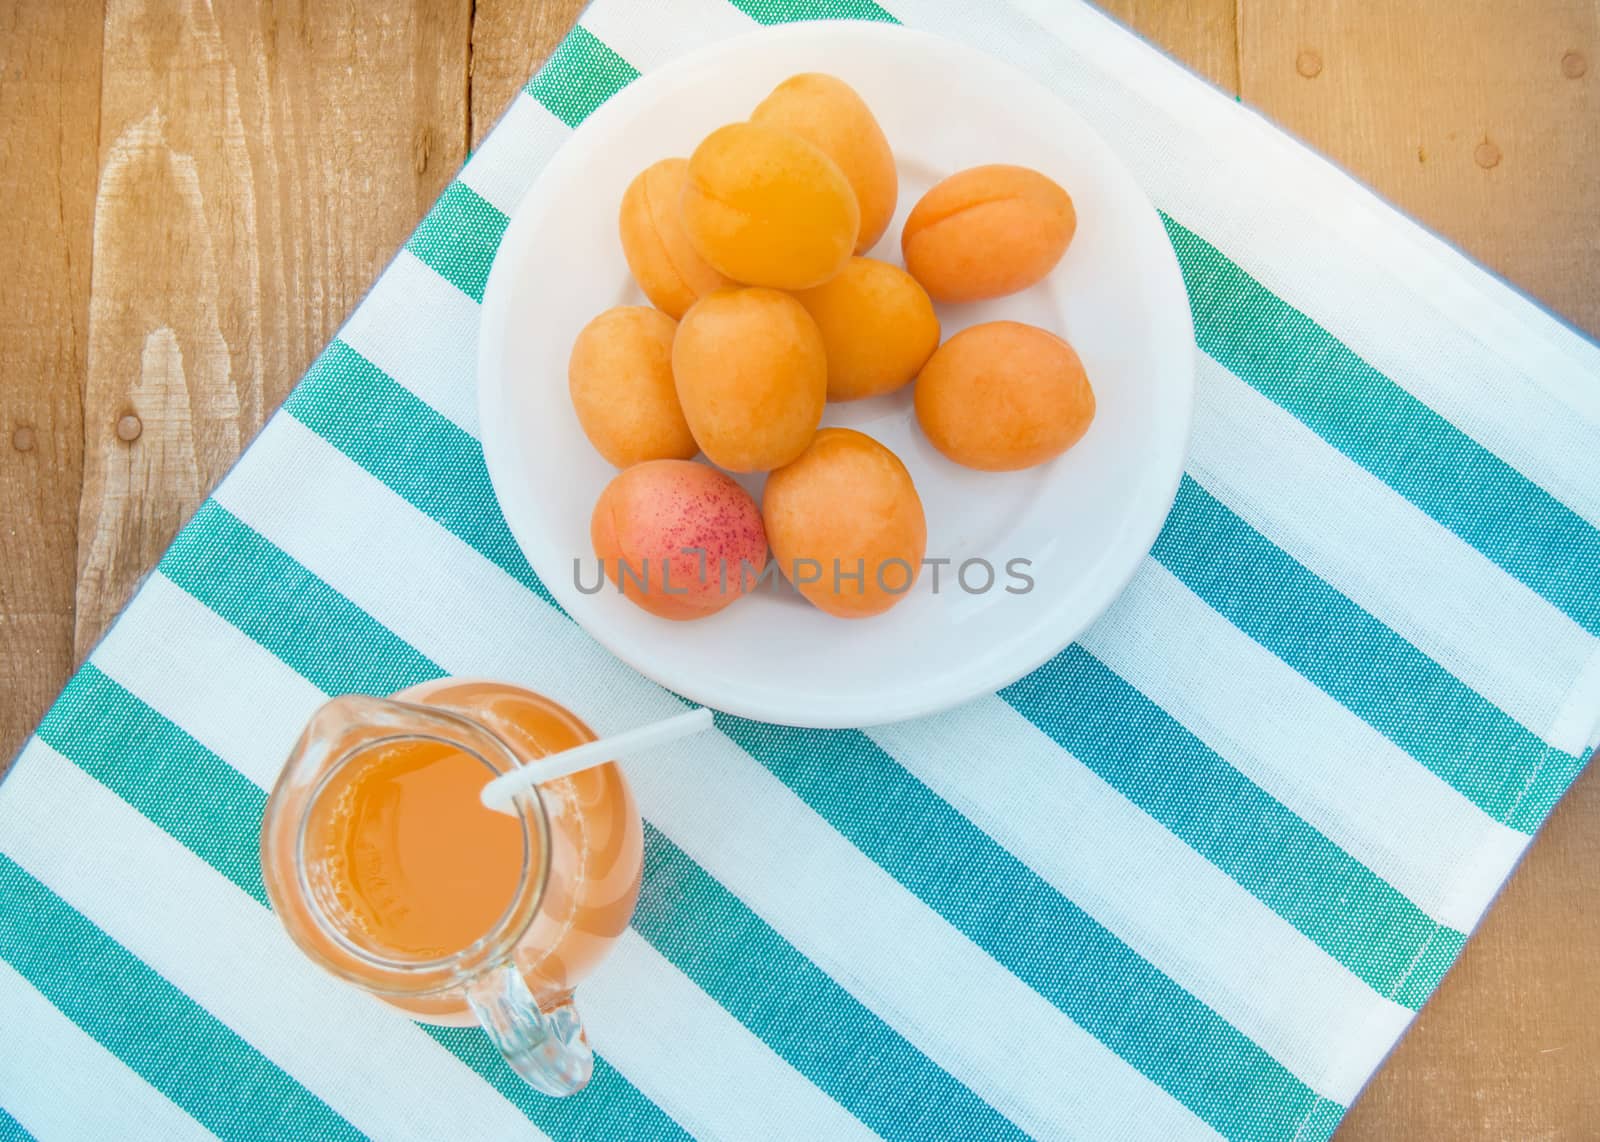 Summer drink and fruit-fresh apricot juice in a glass jug and ripe apricots on a napkin, top view, outdoor by claire_lucia